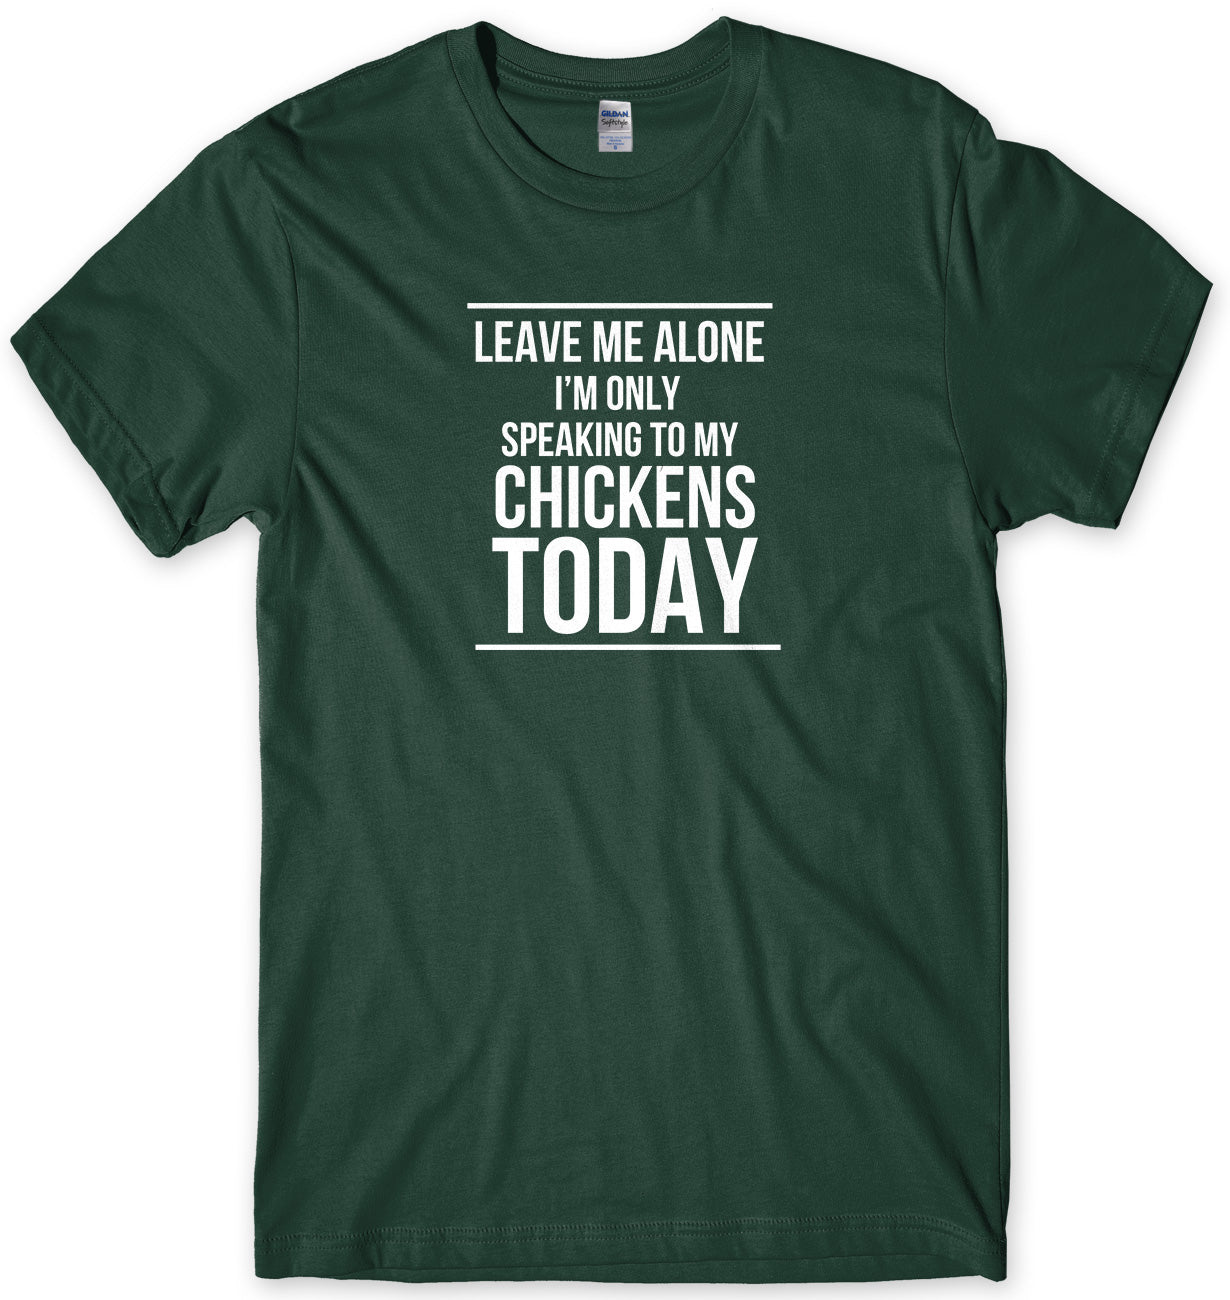 LEAVE ME ALONE I'M ONLY SPEAKING TO MY CHICKENS TODAY MENS FUNNY SLOGAN UNISEX T-SHIRT